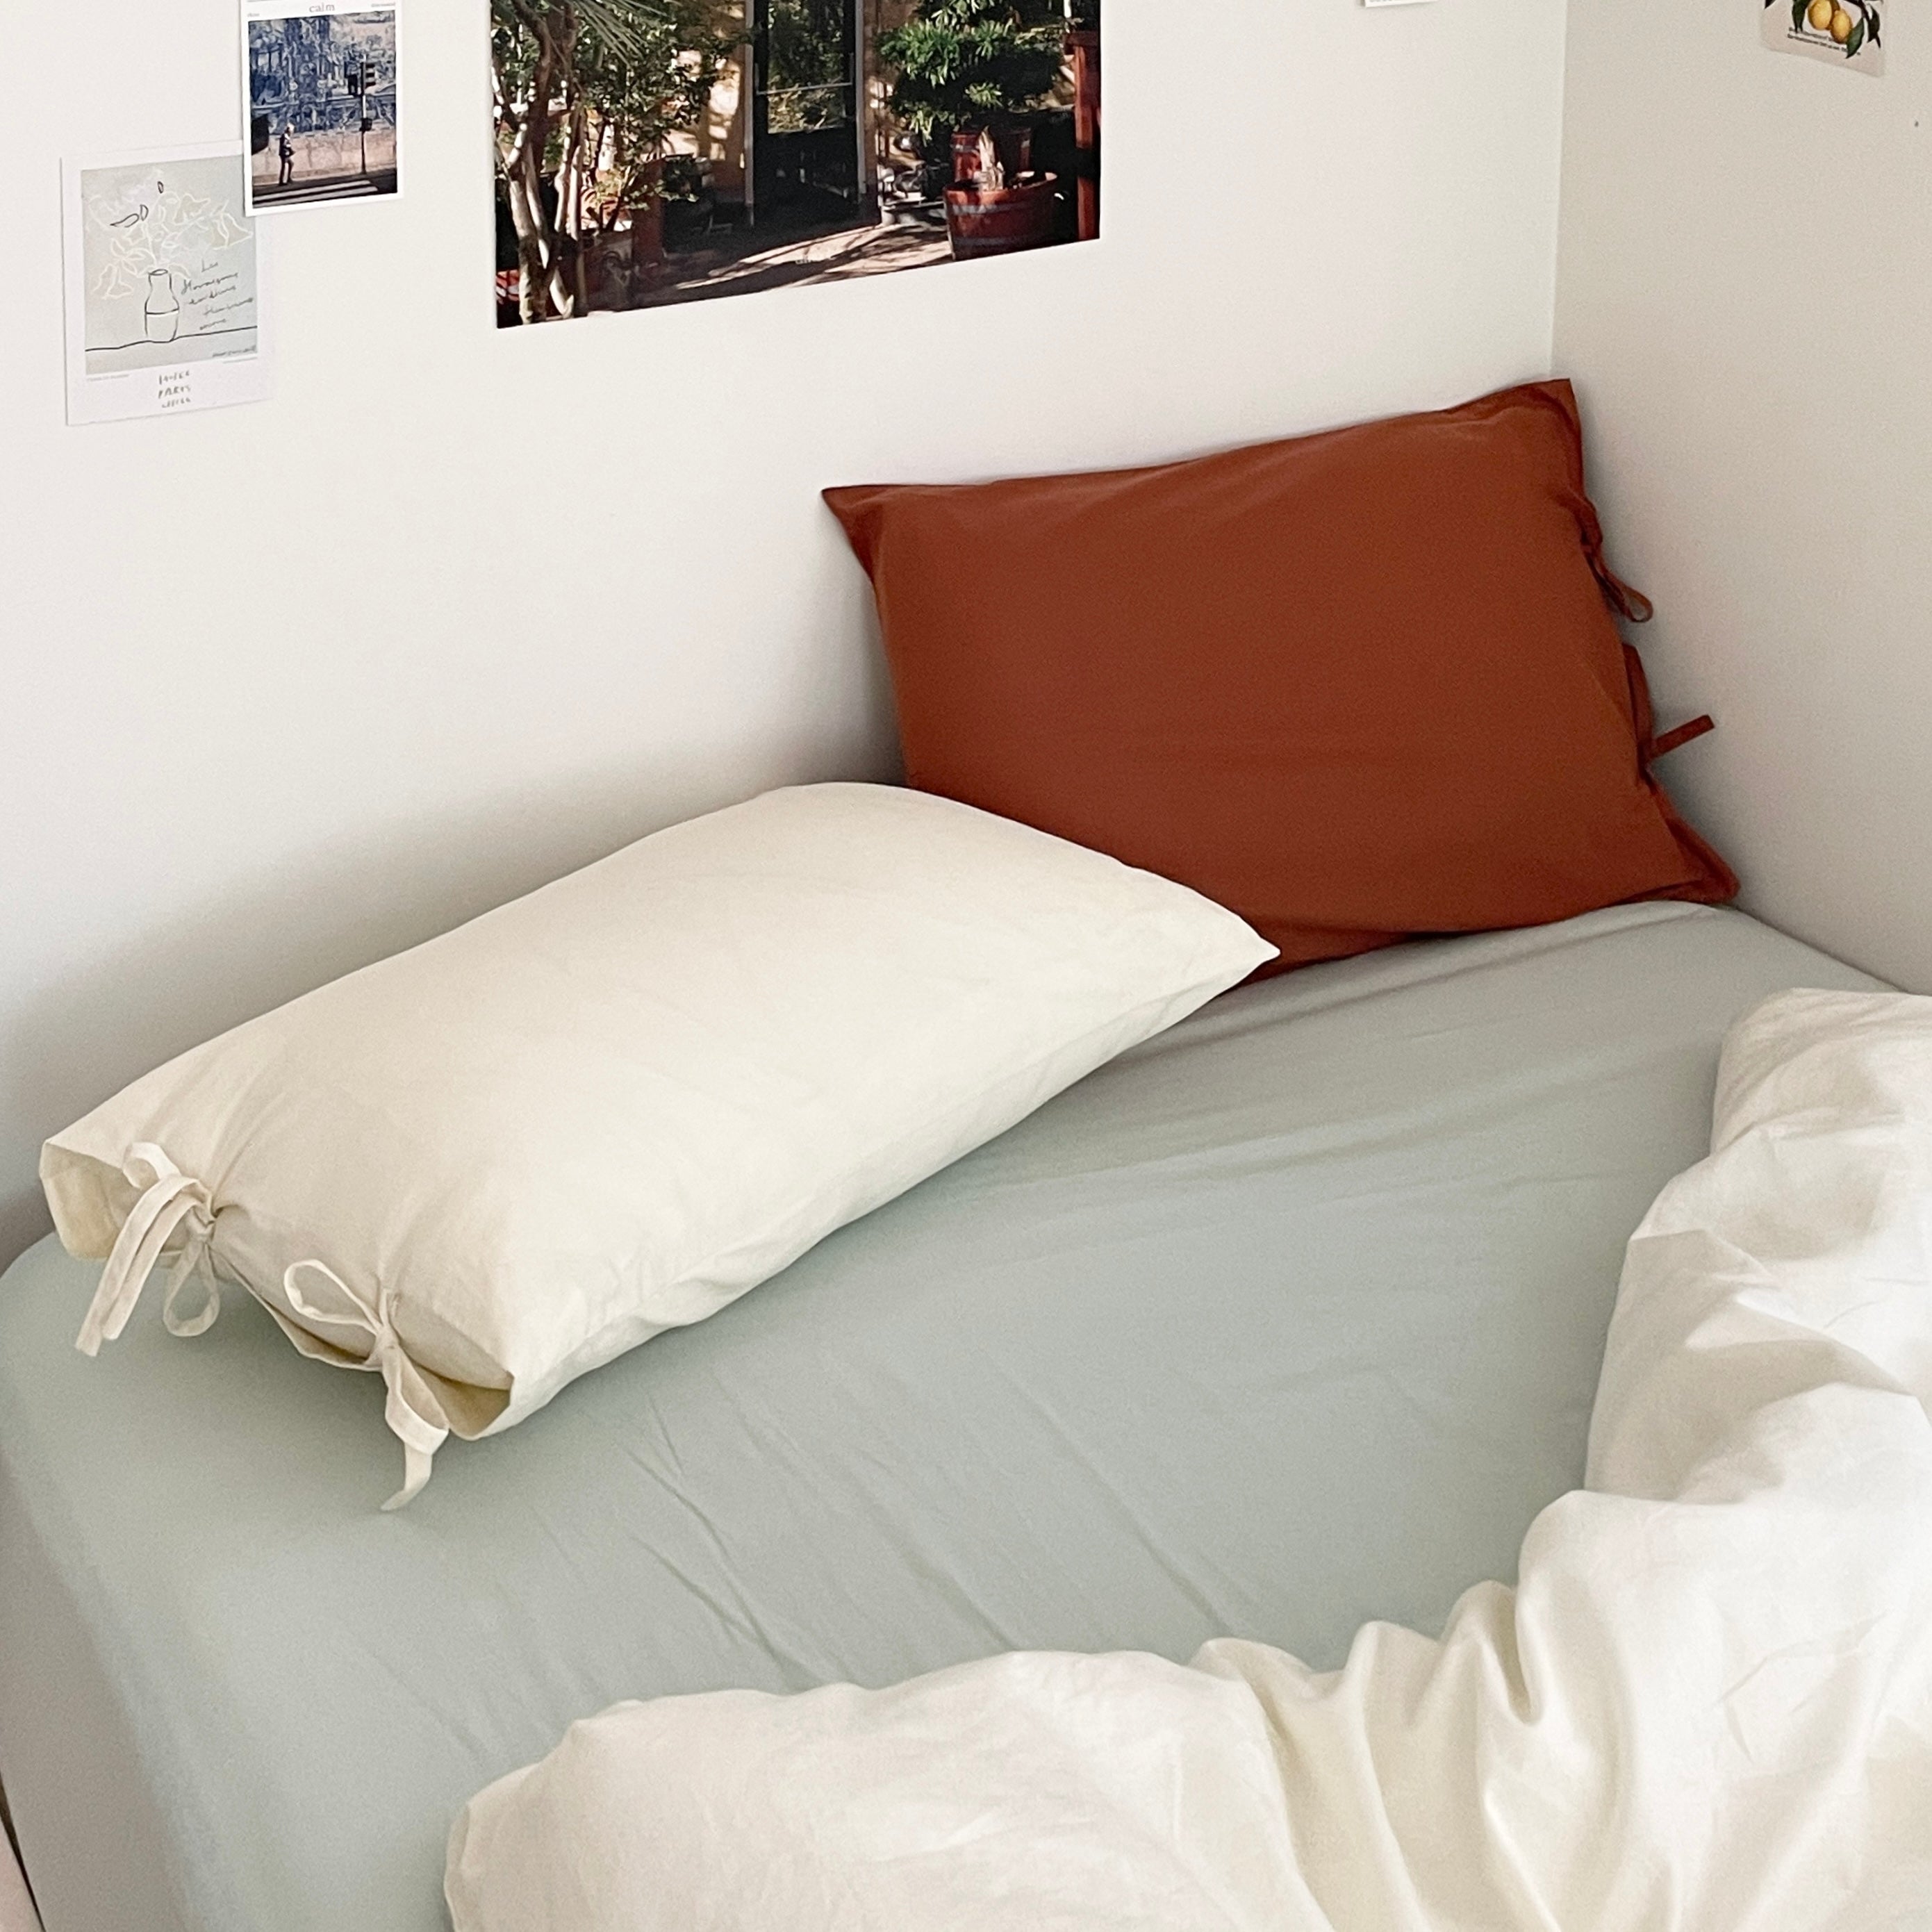 OR-2007-Little Rooms-ボックスシーツ｜plain mattress cover -pale color-